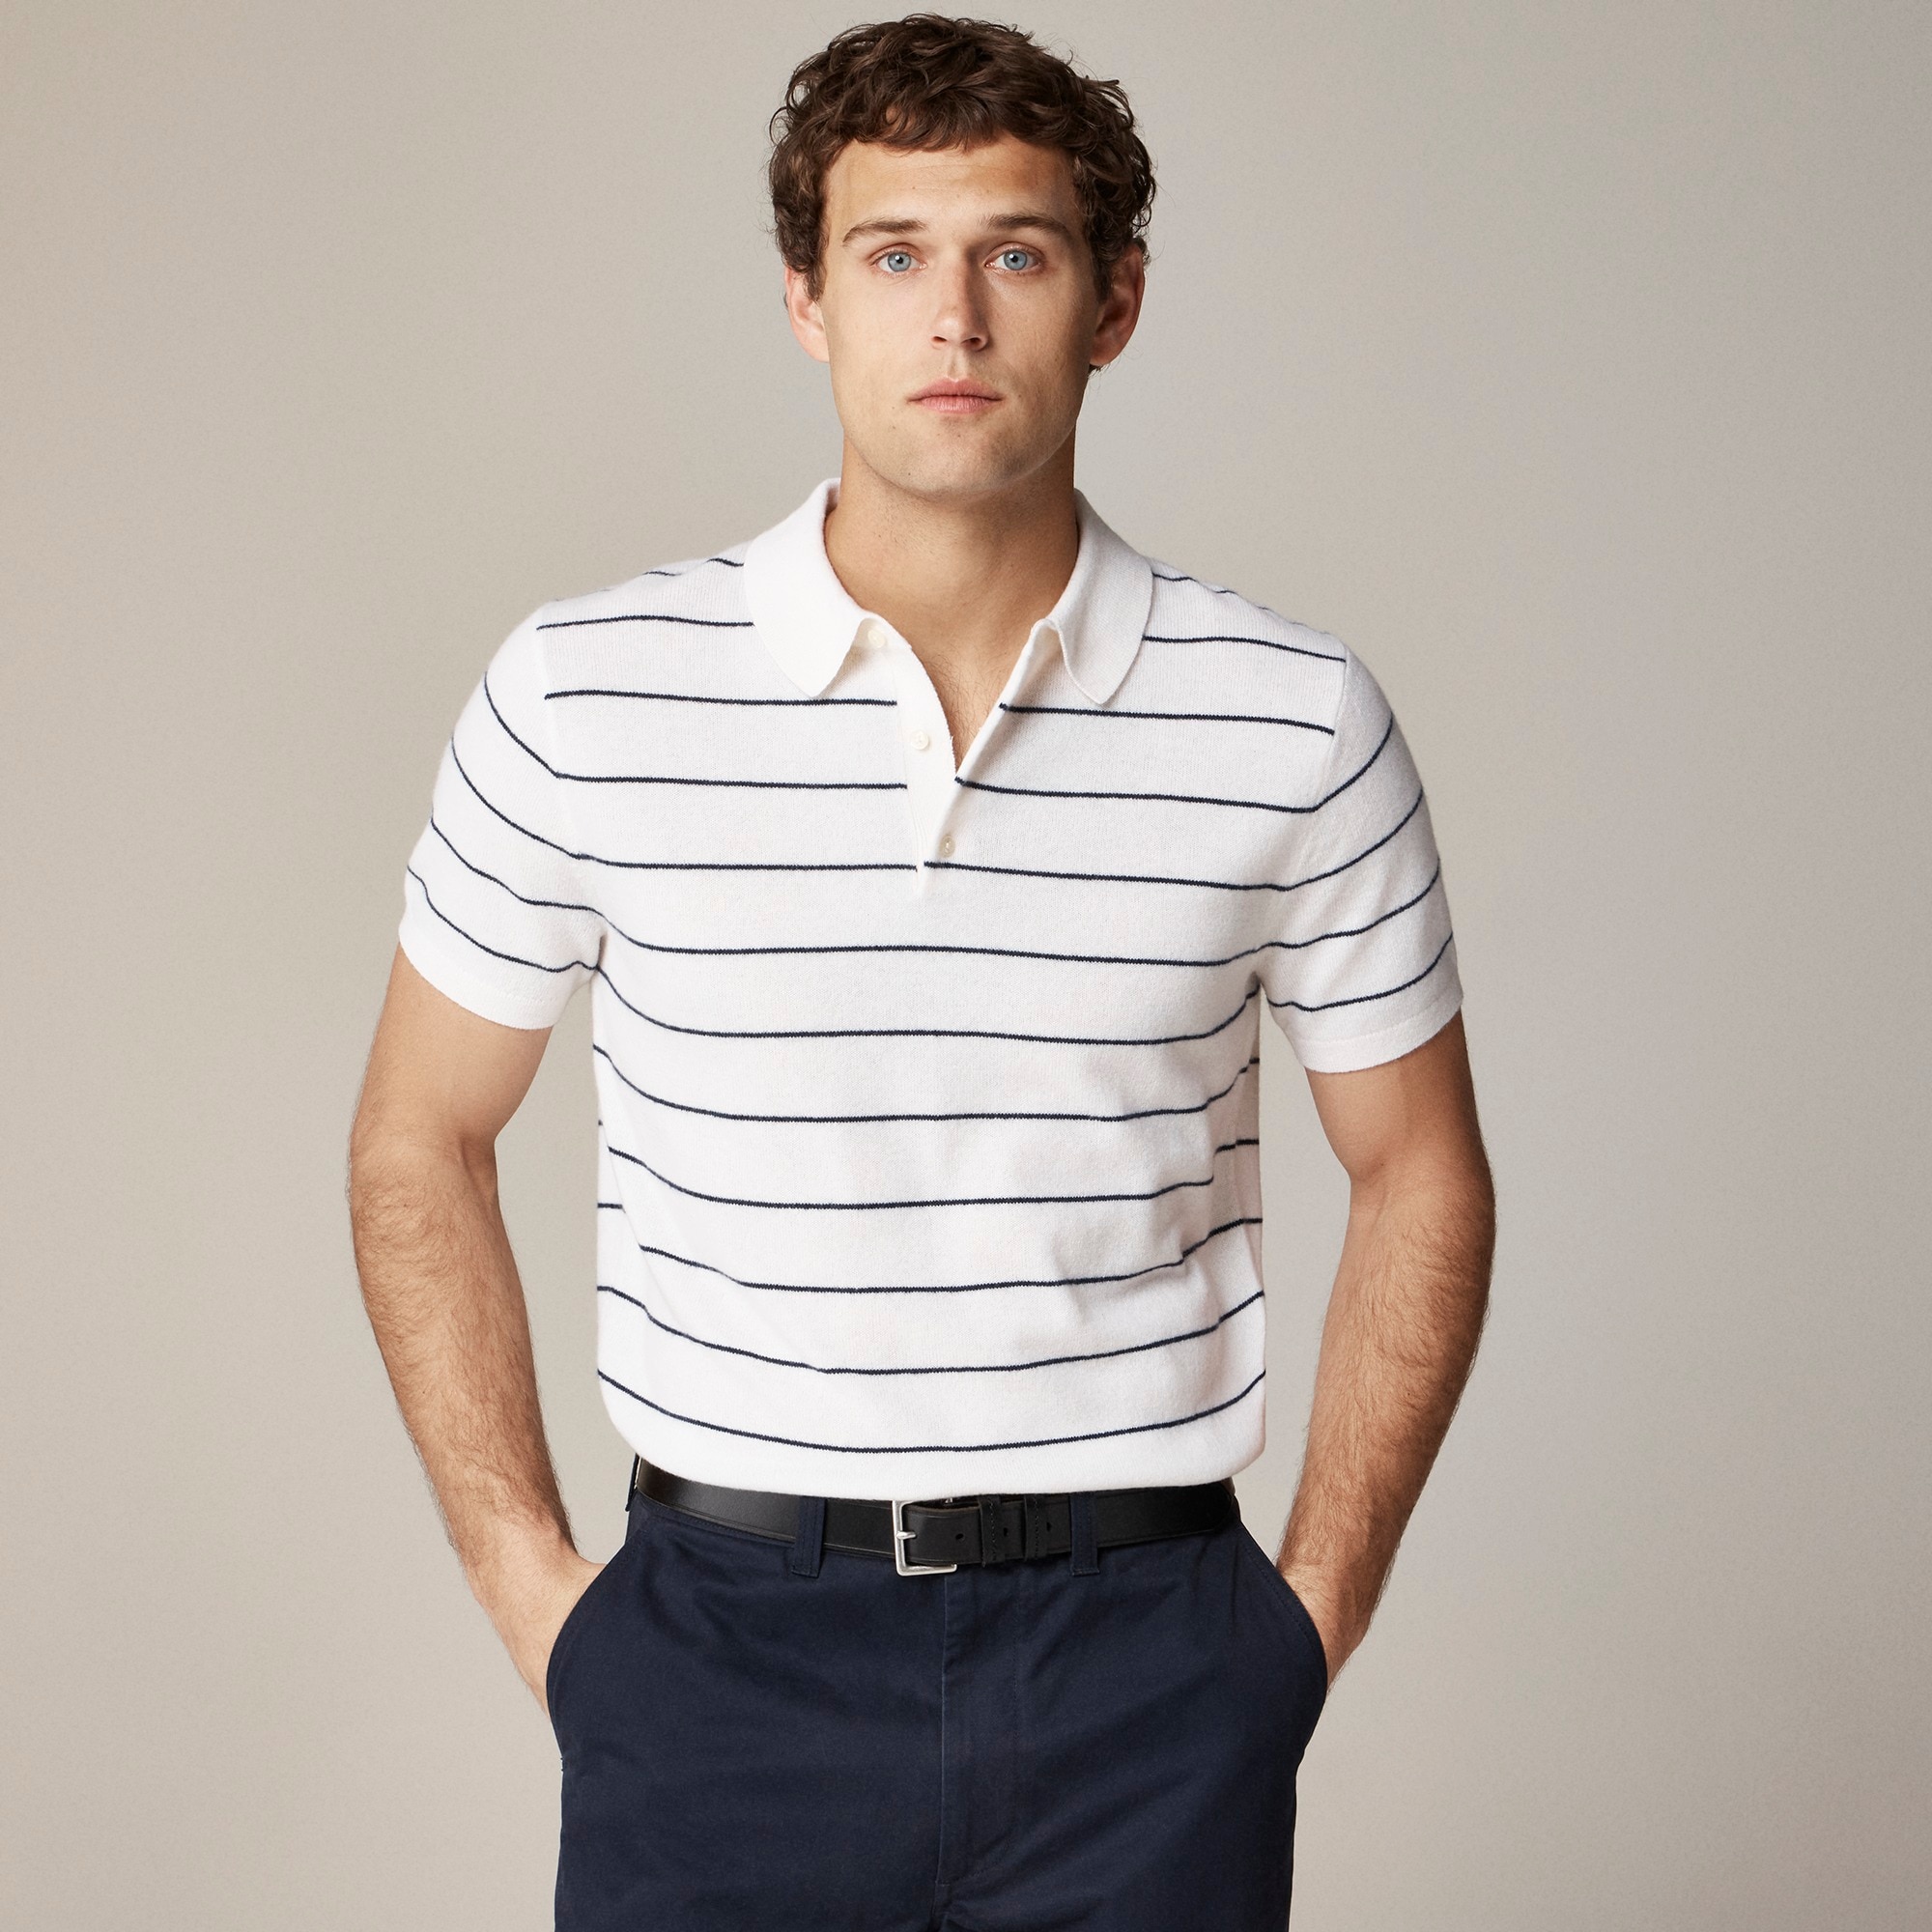 mens Short-sleeve cashmere sweater-polo in stripe